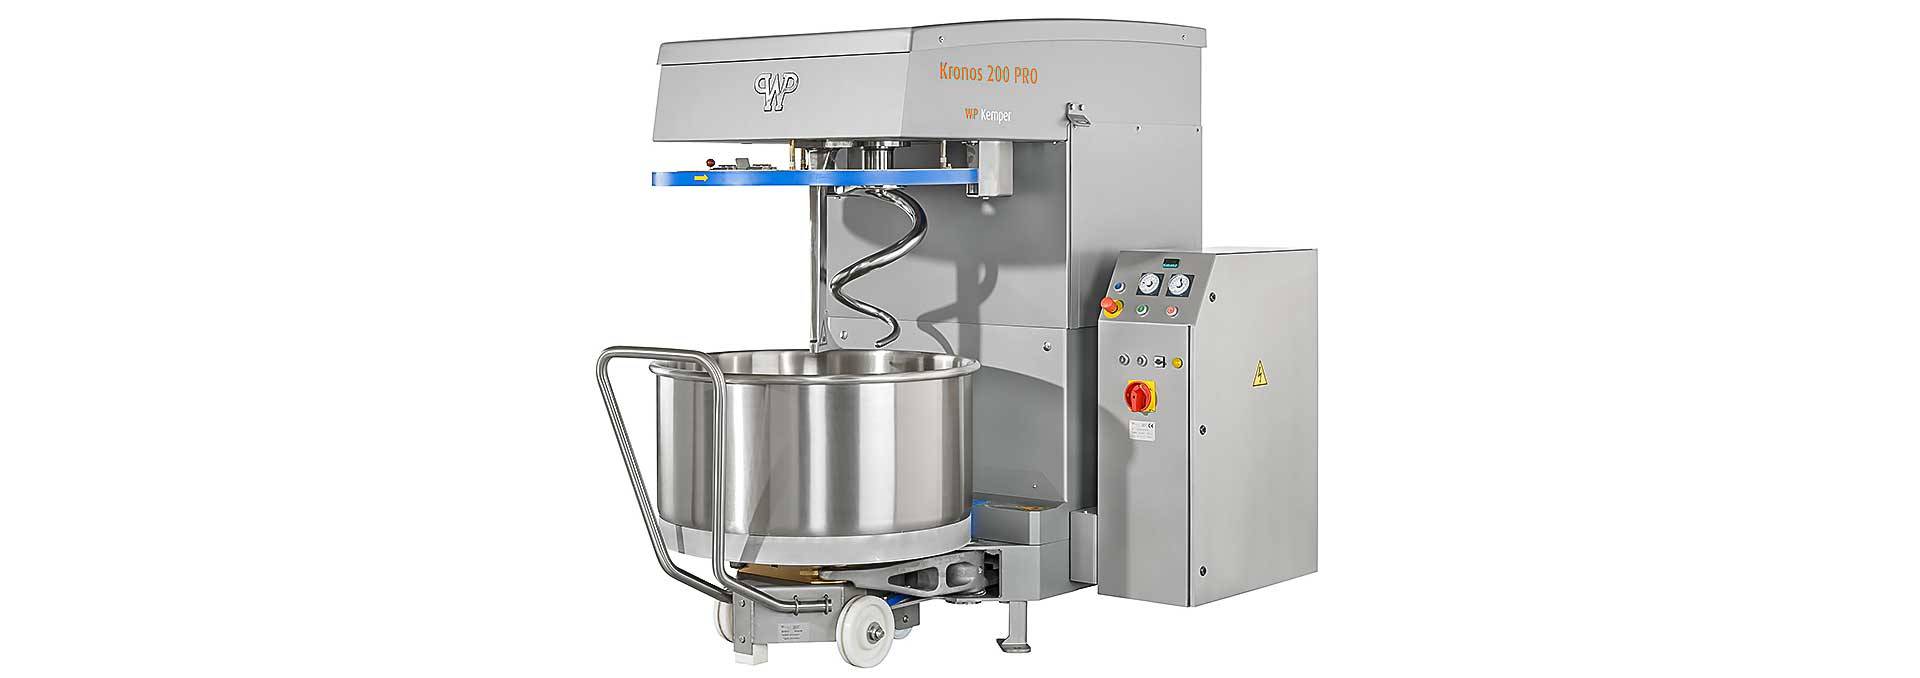 WP Kemper Kronos Spiral Mixer | WP Bakery Group USA, Retail, Wholesale and Industrial Baking Equipment and Food Service Equipment, Shelton, CT USA